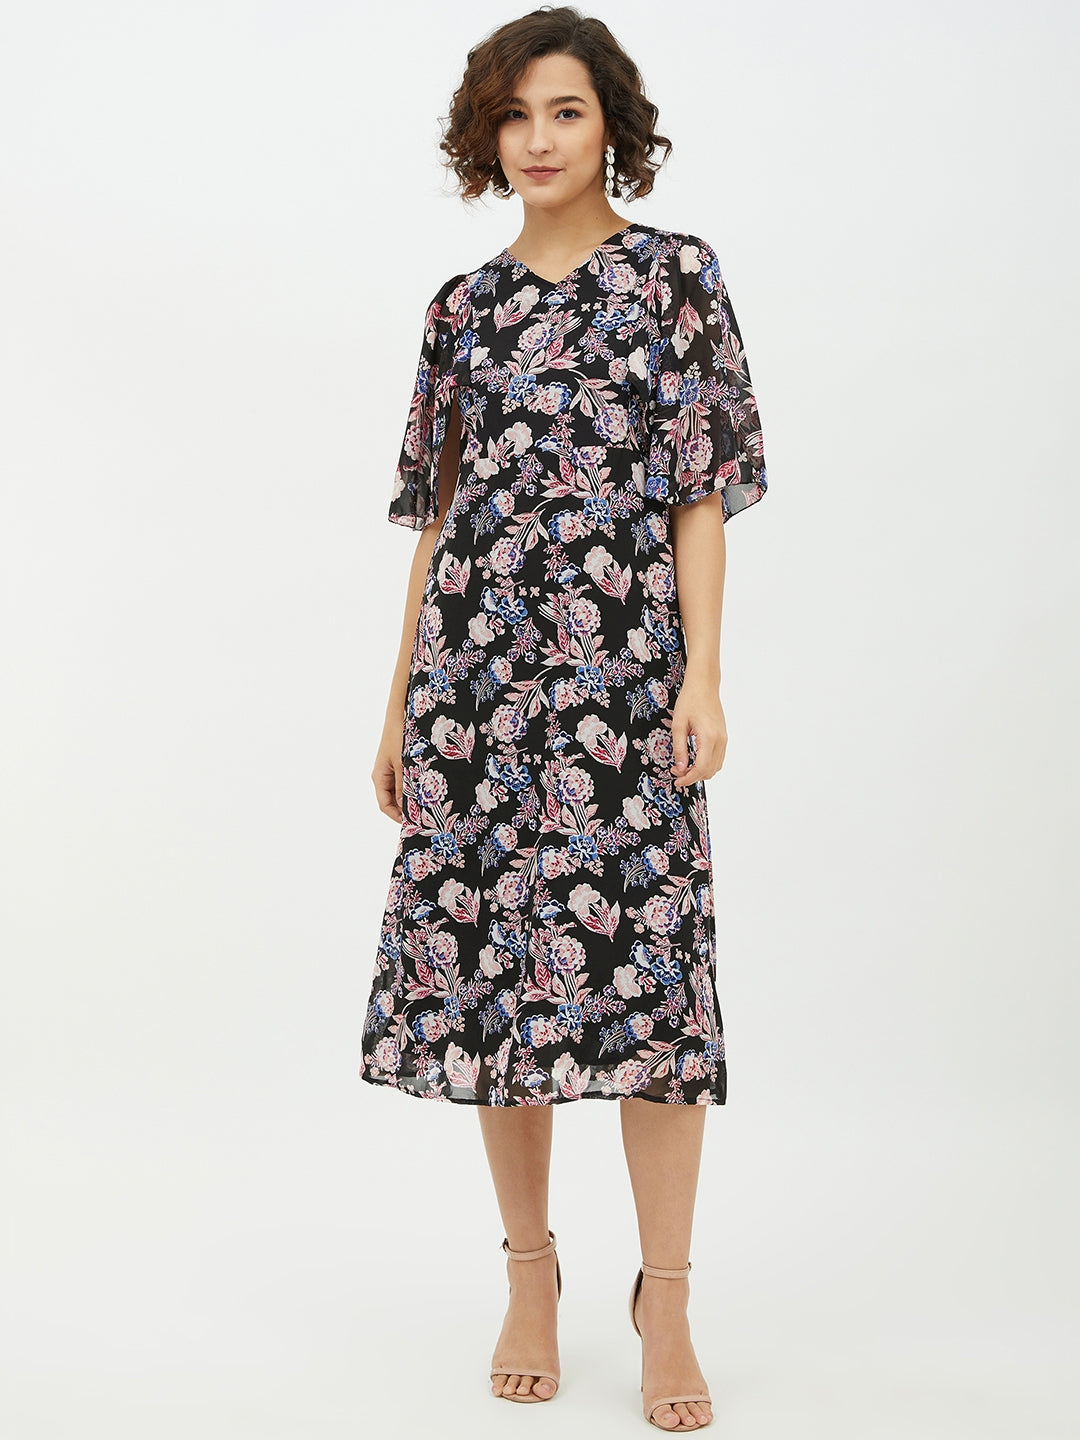 Women's Polyester Georgette Floral Print Cape style Dress - StyleStone